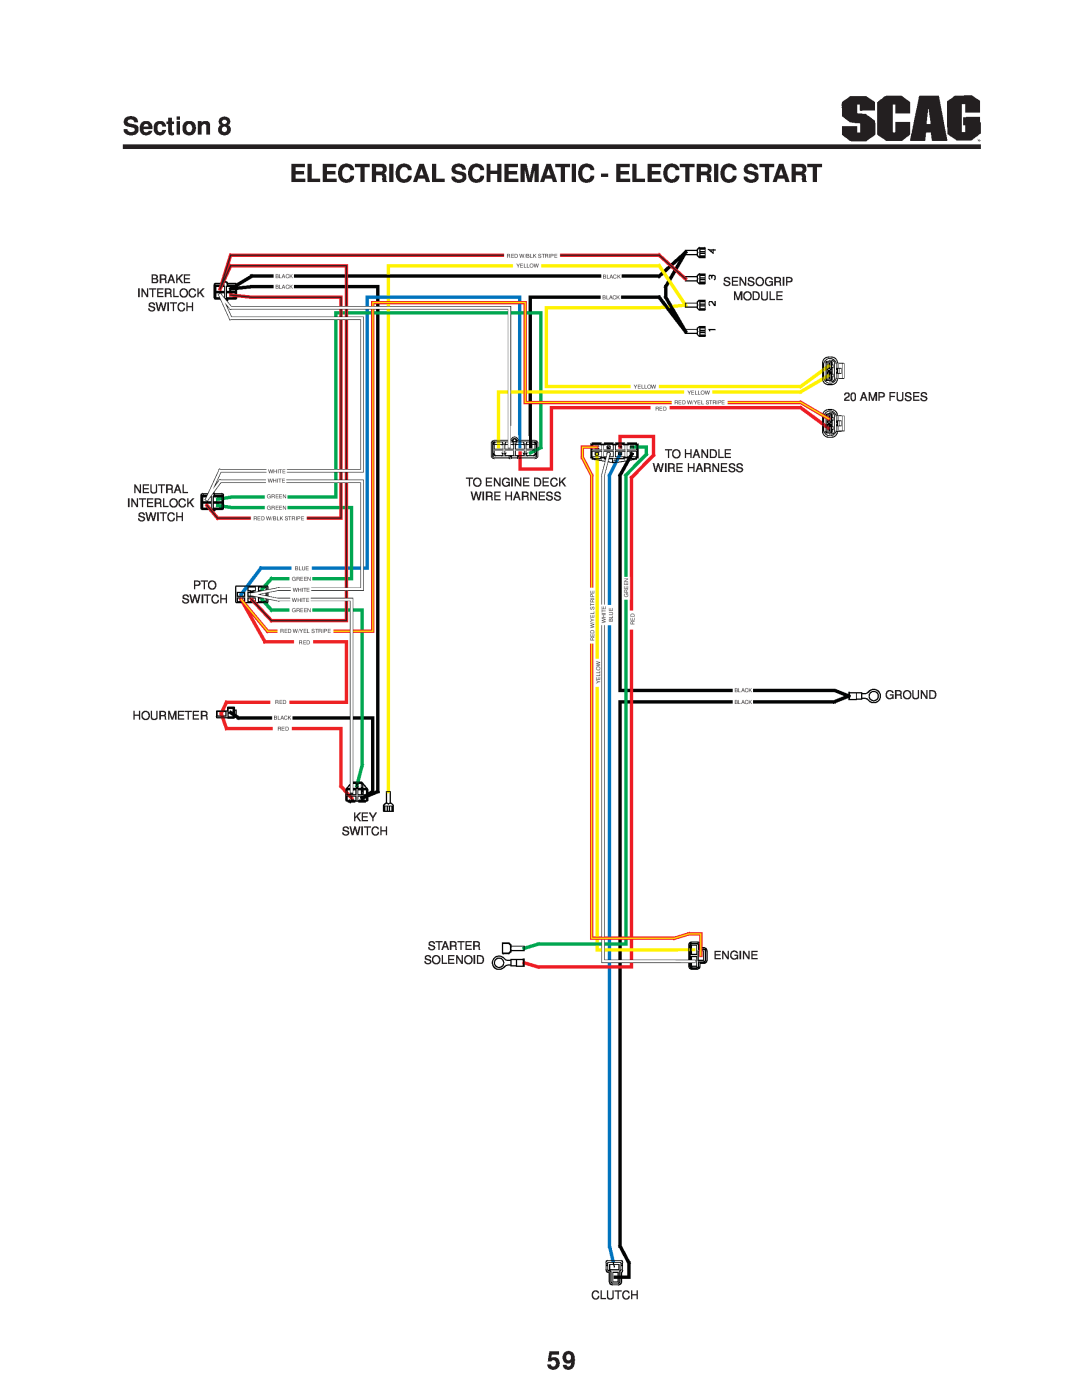 Scag Power Equipment SWZV manual Section, Electrical Schematic - Electric Start, Module, Engine, Amp Fuses Ground, Clutch 